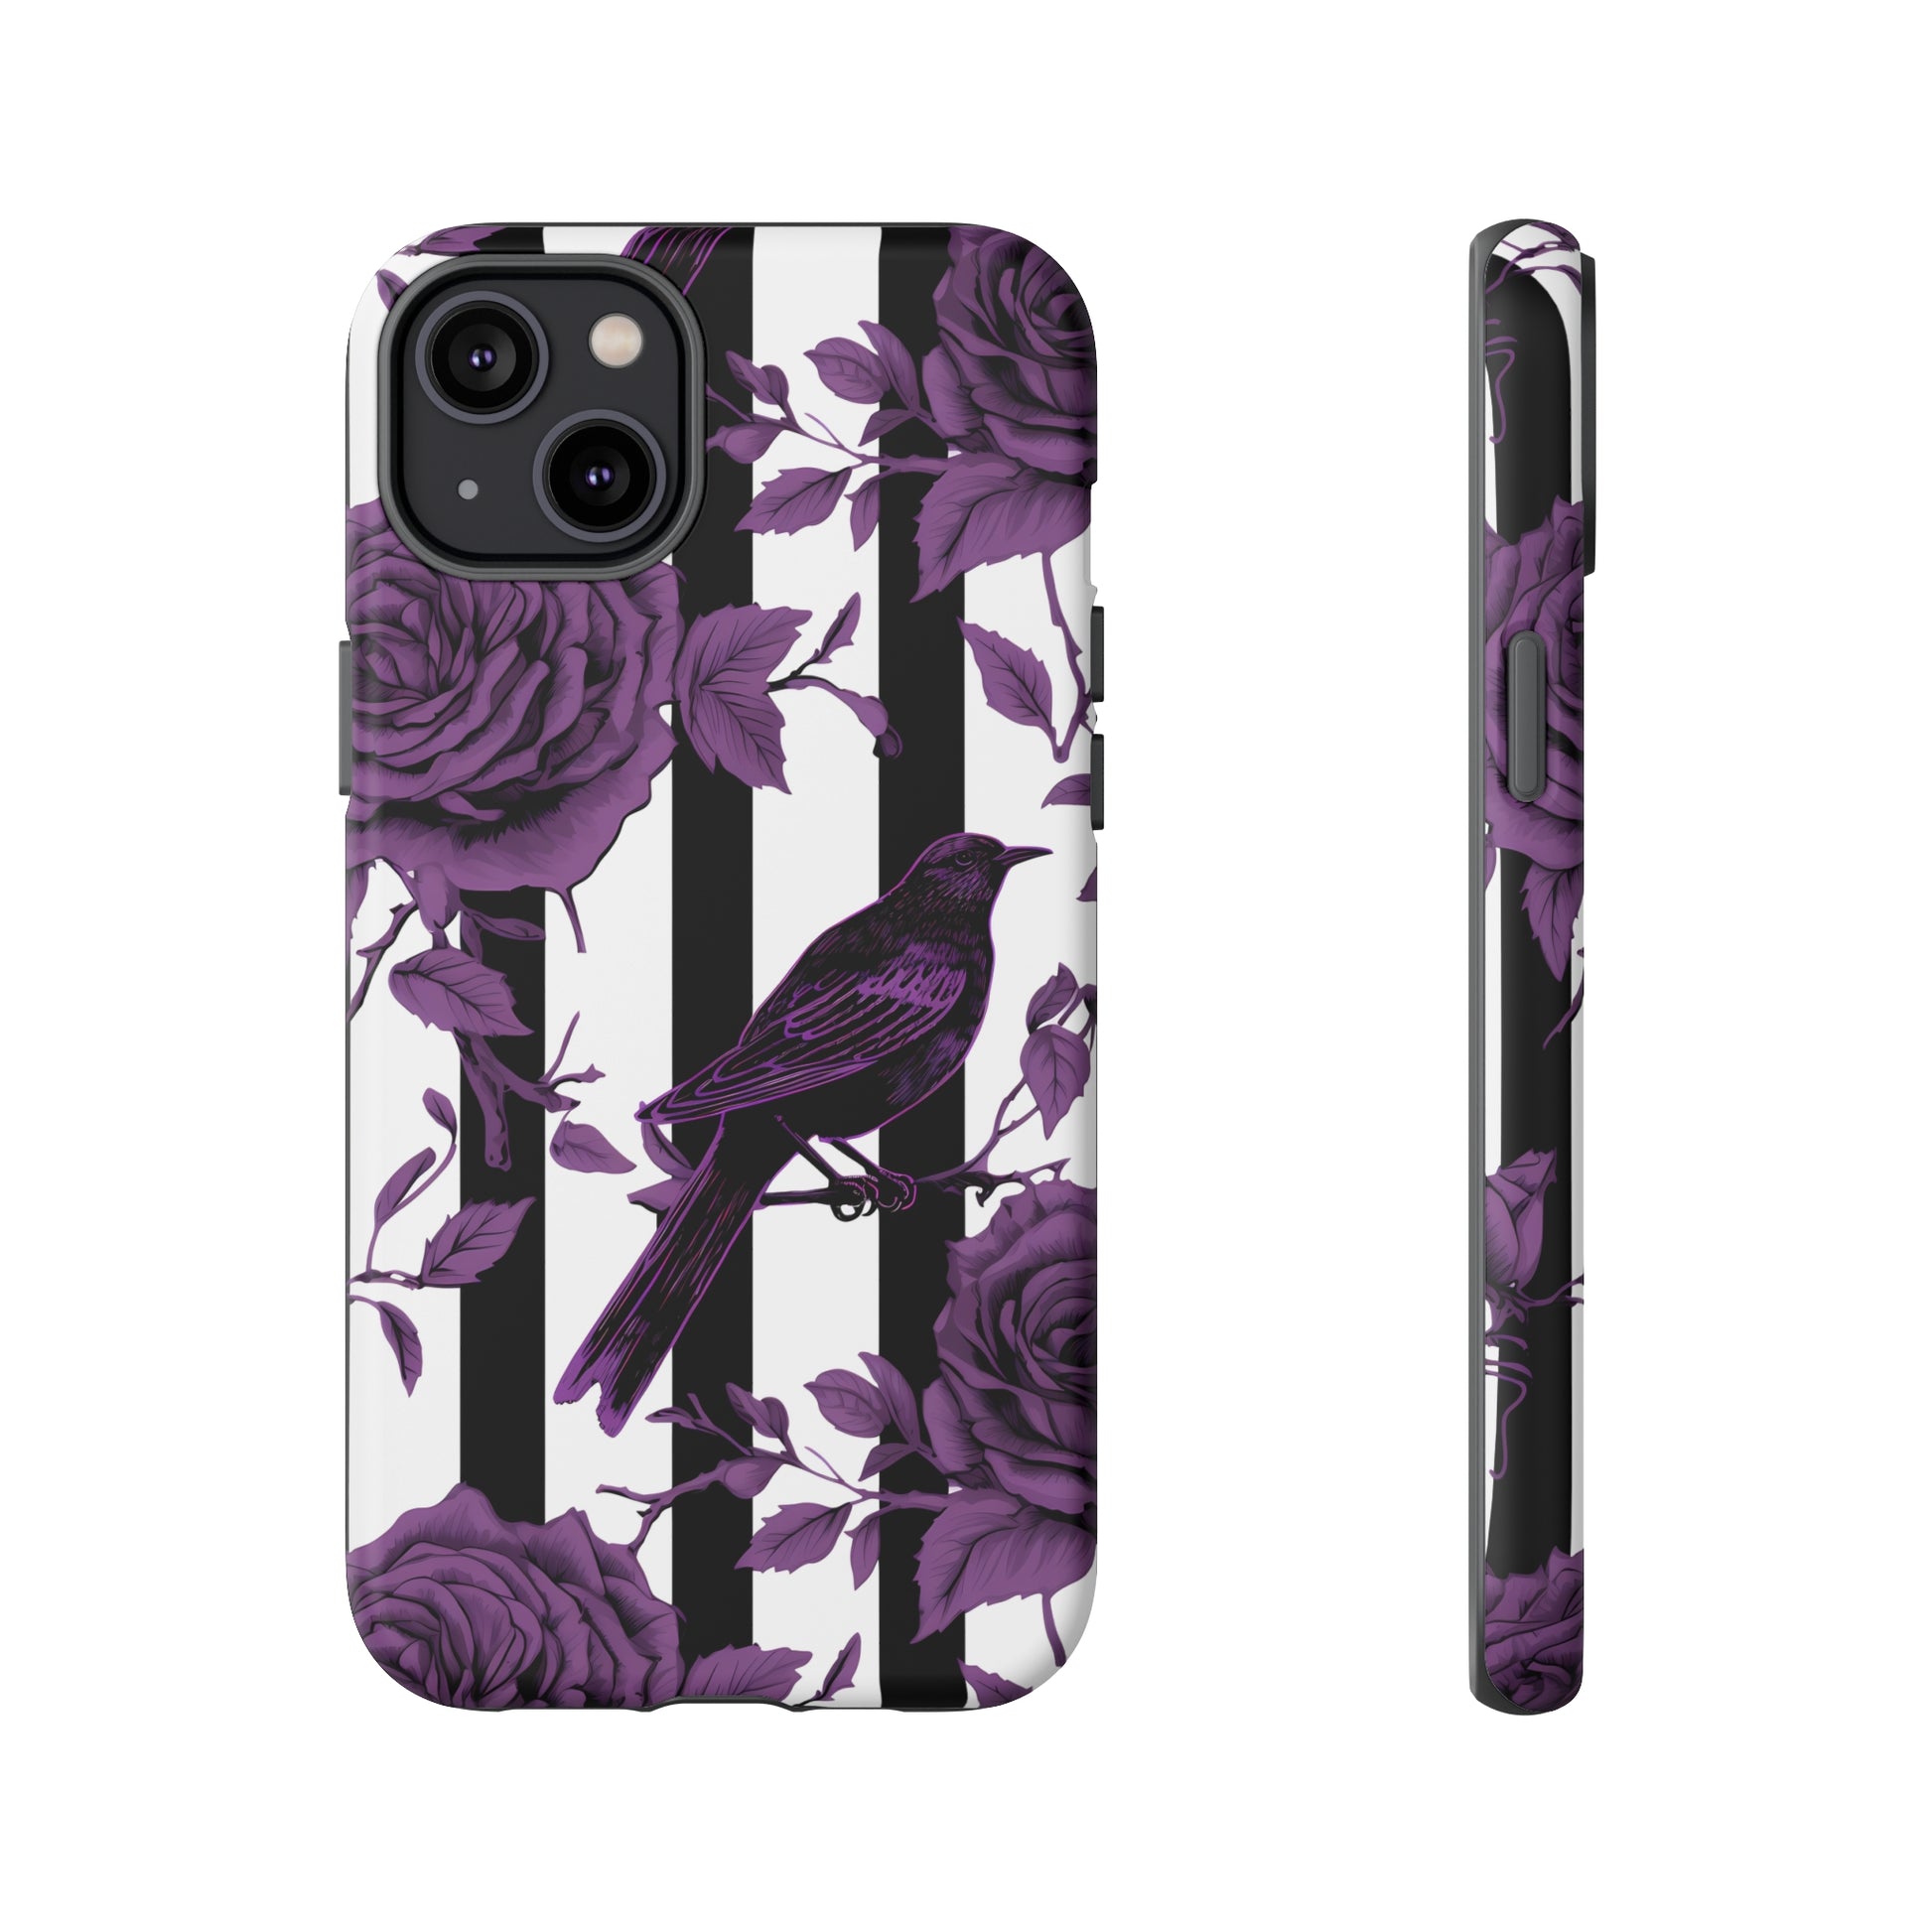 Striped Crows and Roses Tough Cases for iPhone Samsung Google PhonesPhone CaseVTZdesignsiPhone 14 PlusMatteAccessoriescrowsGlossy